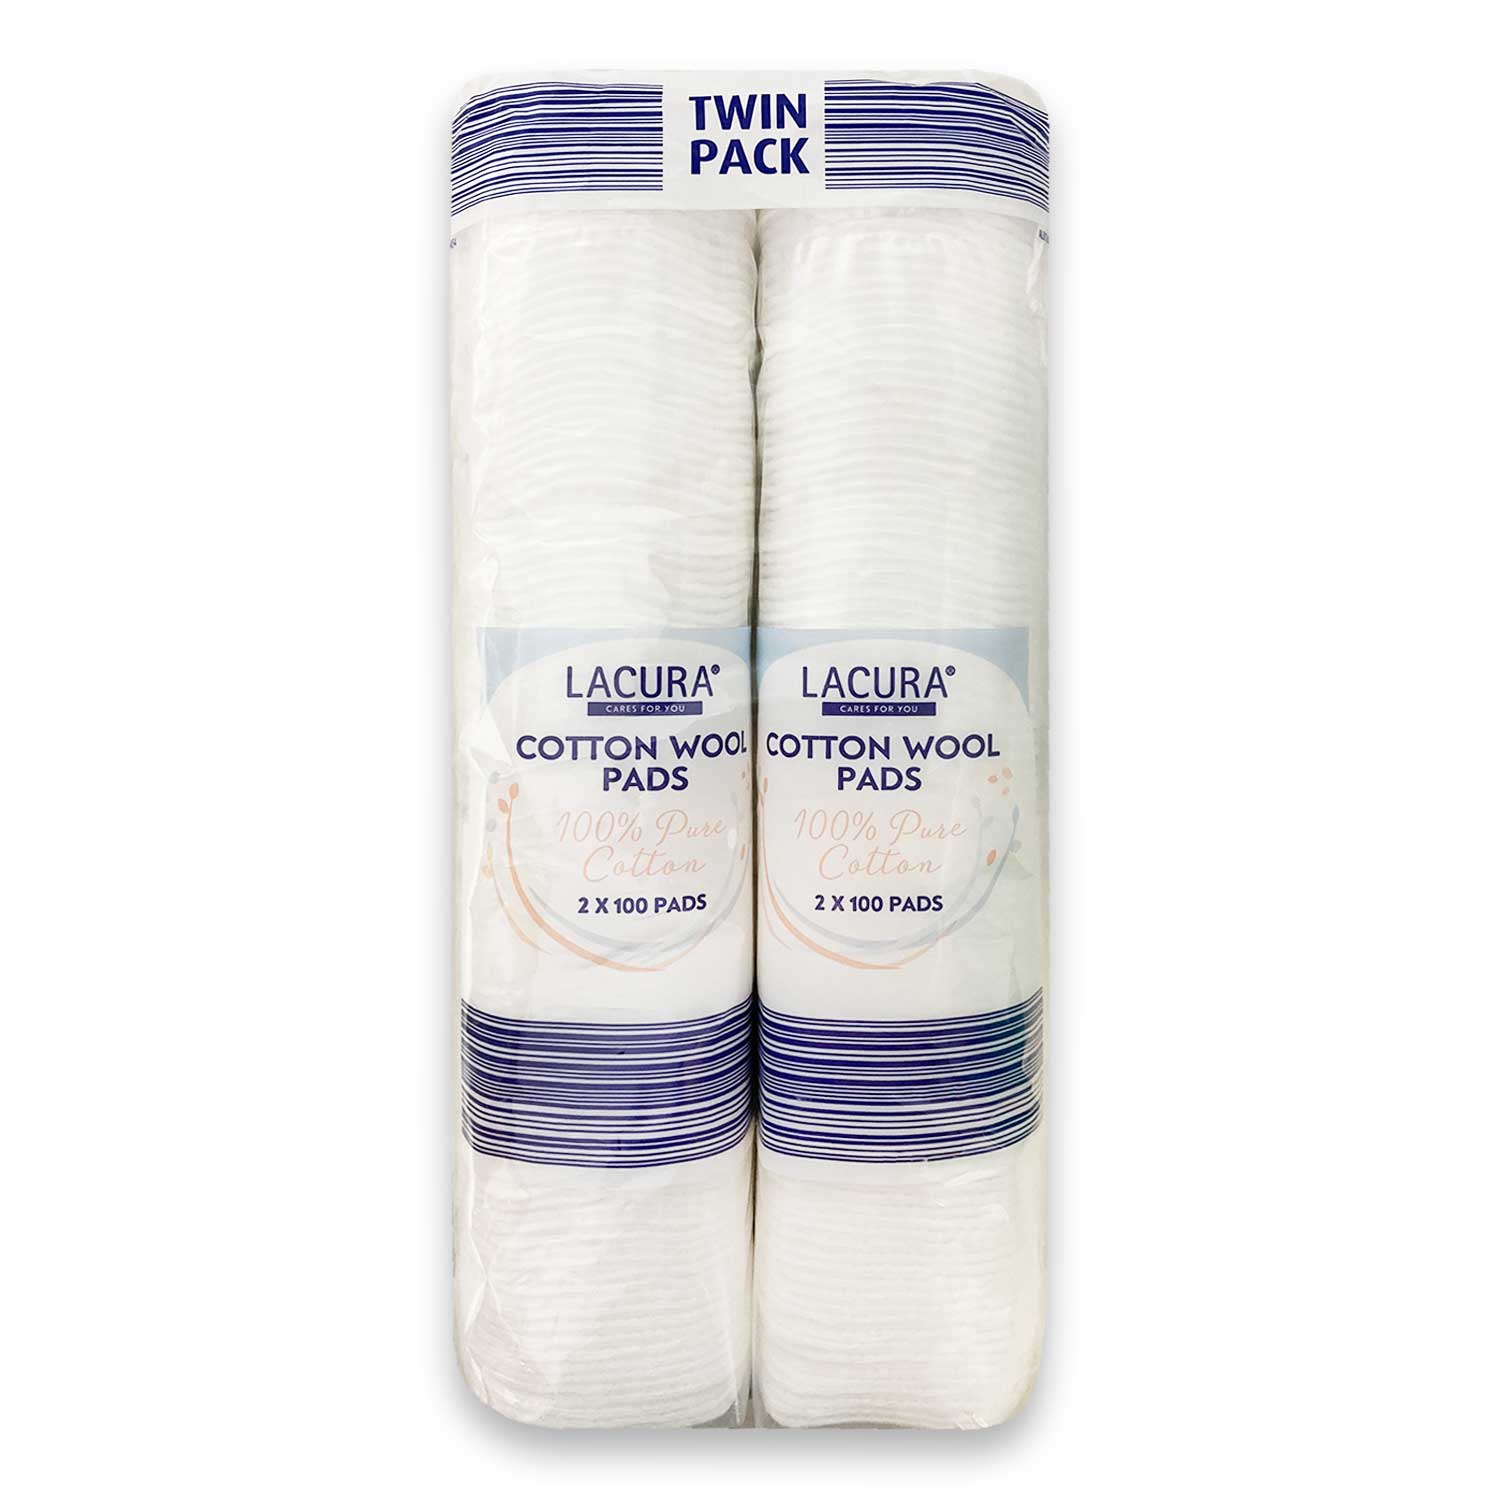 Lacura Cotton Wool Pads 100% Pure Cotton 2 X 100 Pack